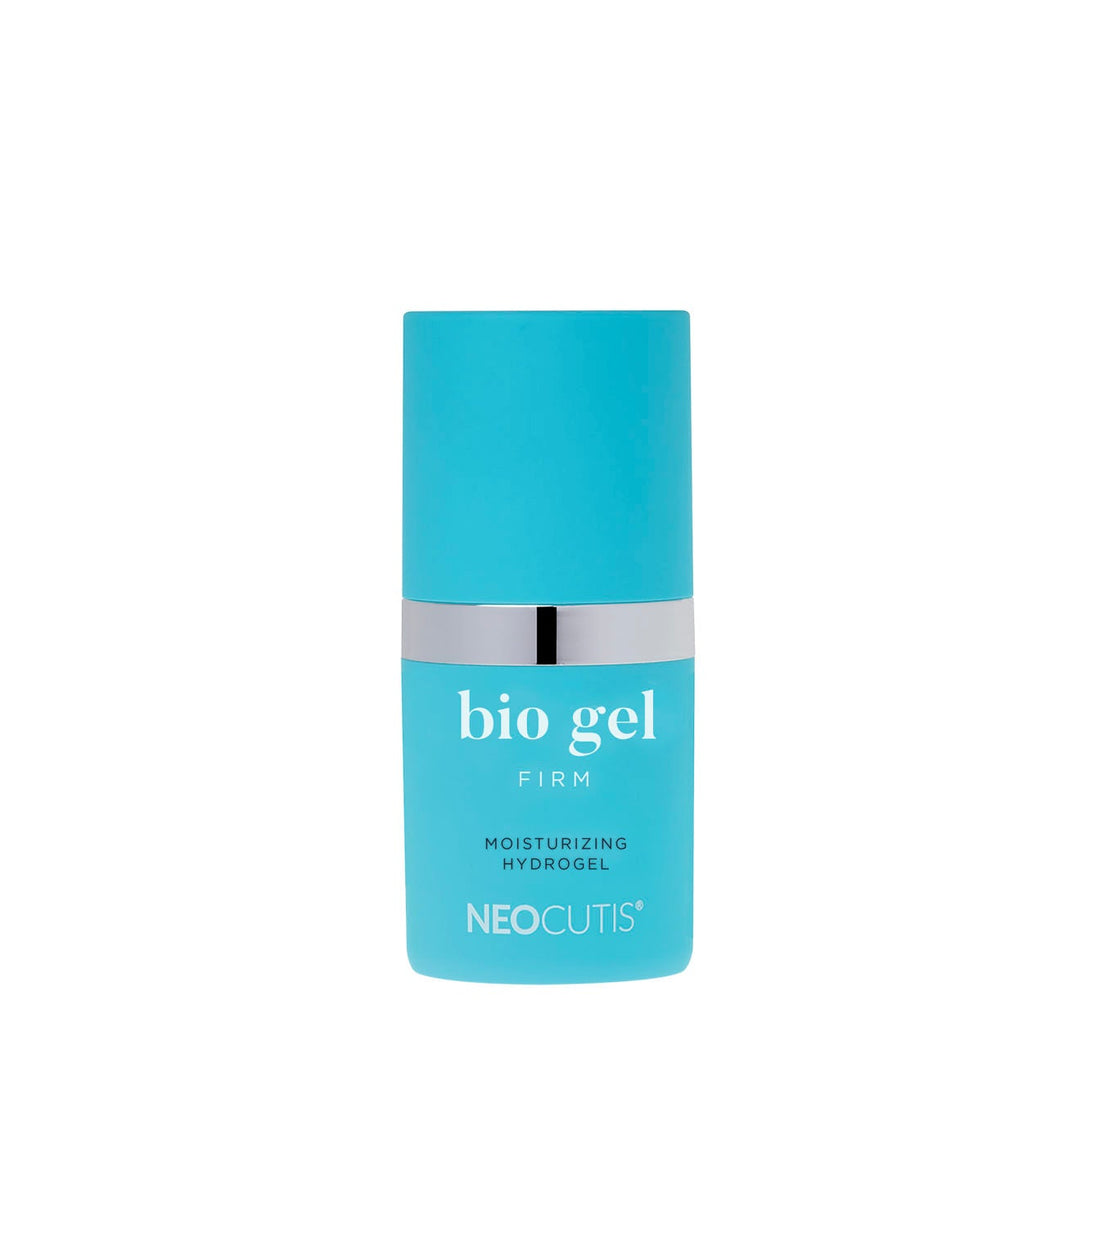 Bio Gel FIRM - The Look and Co